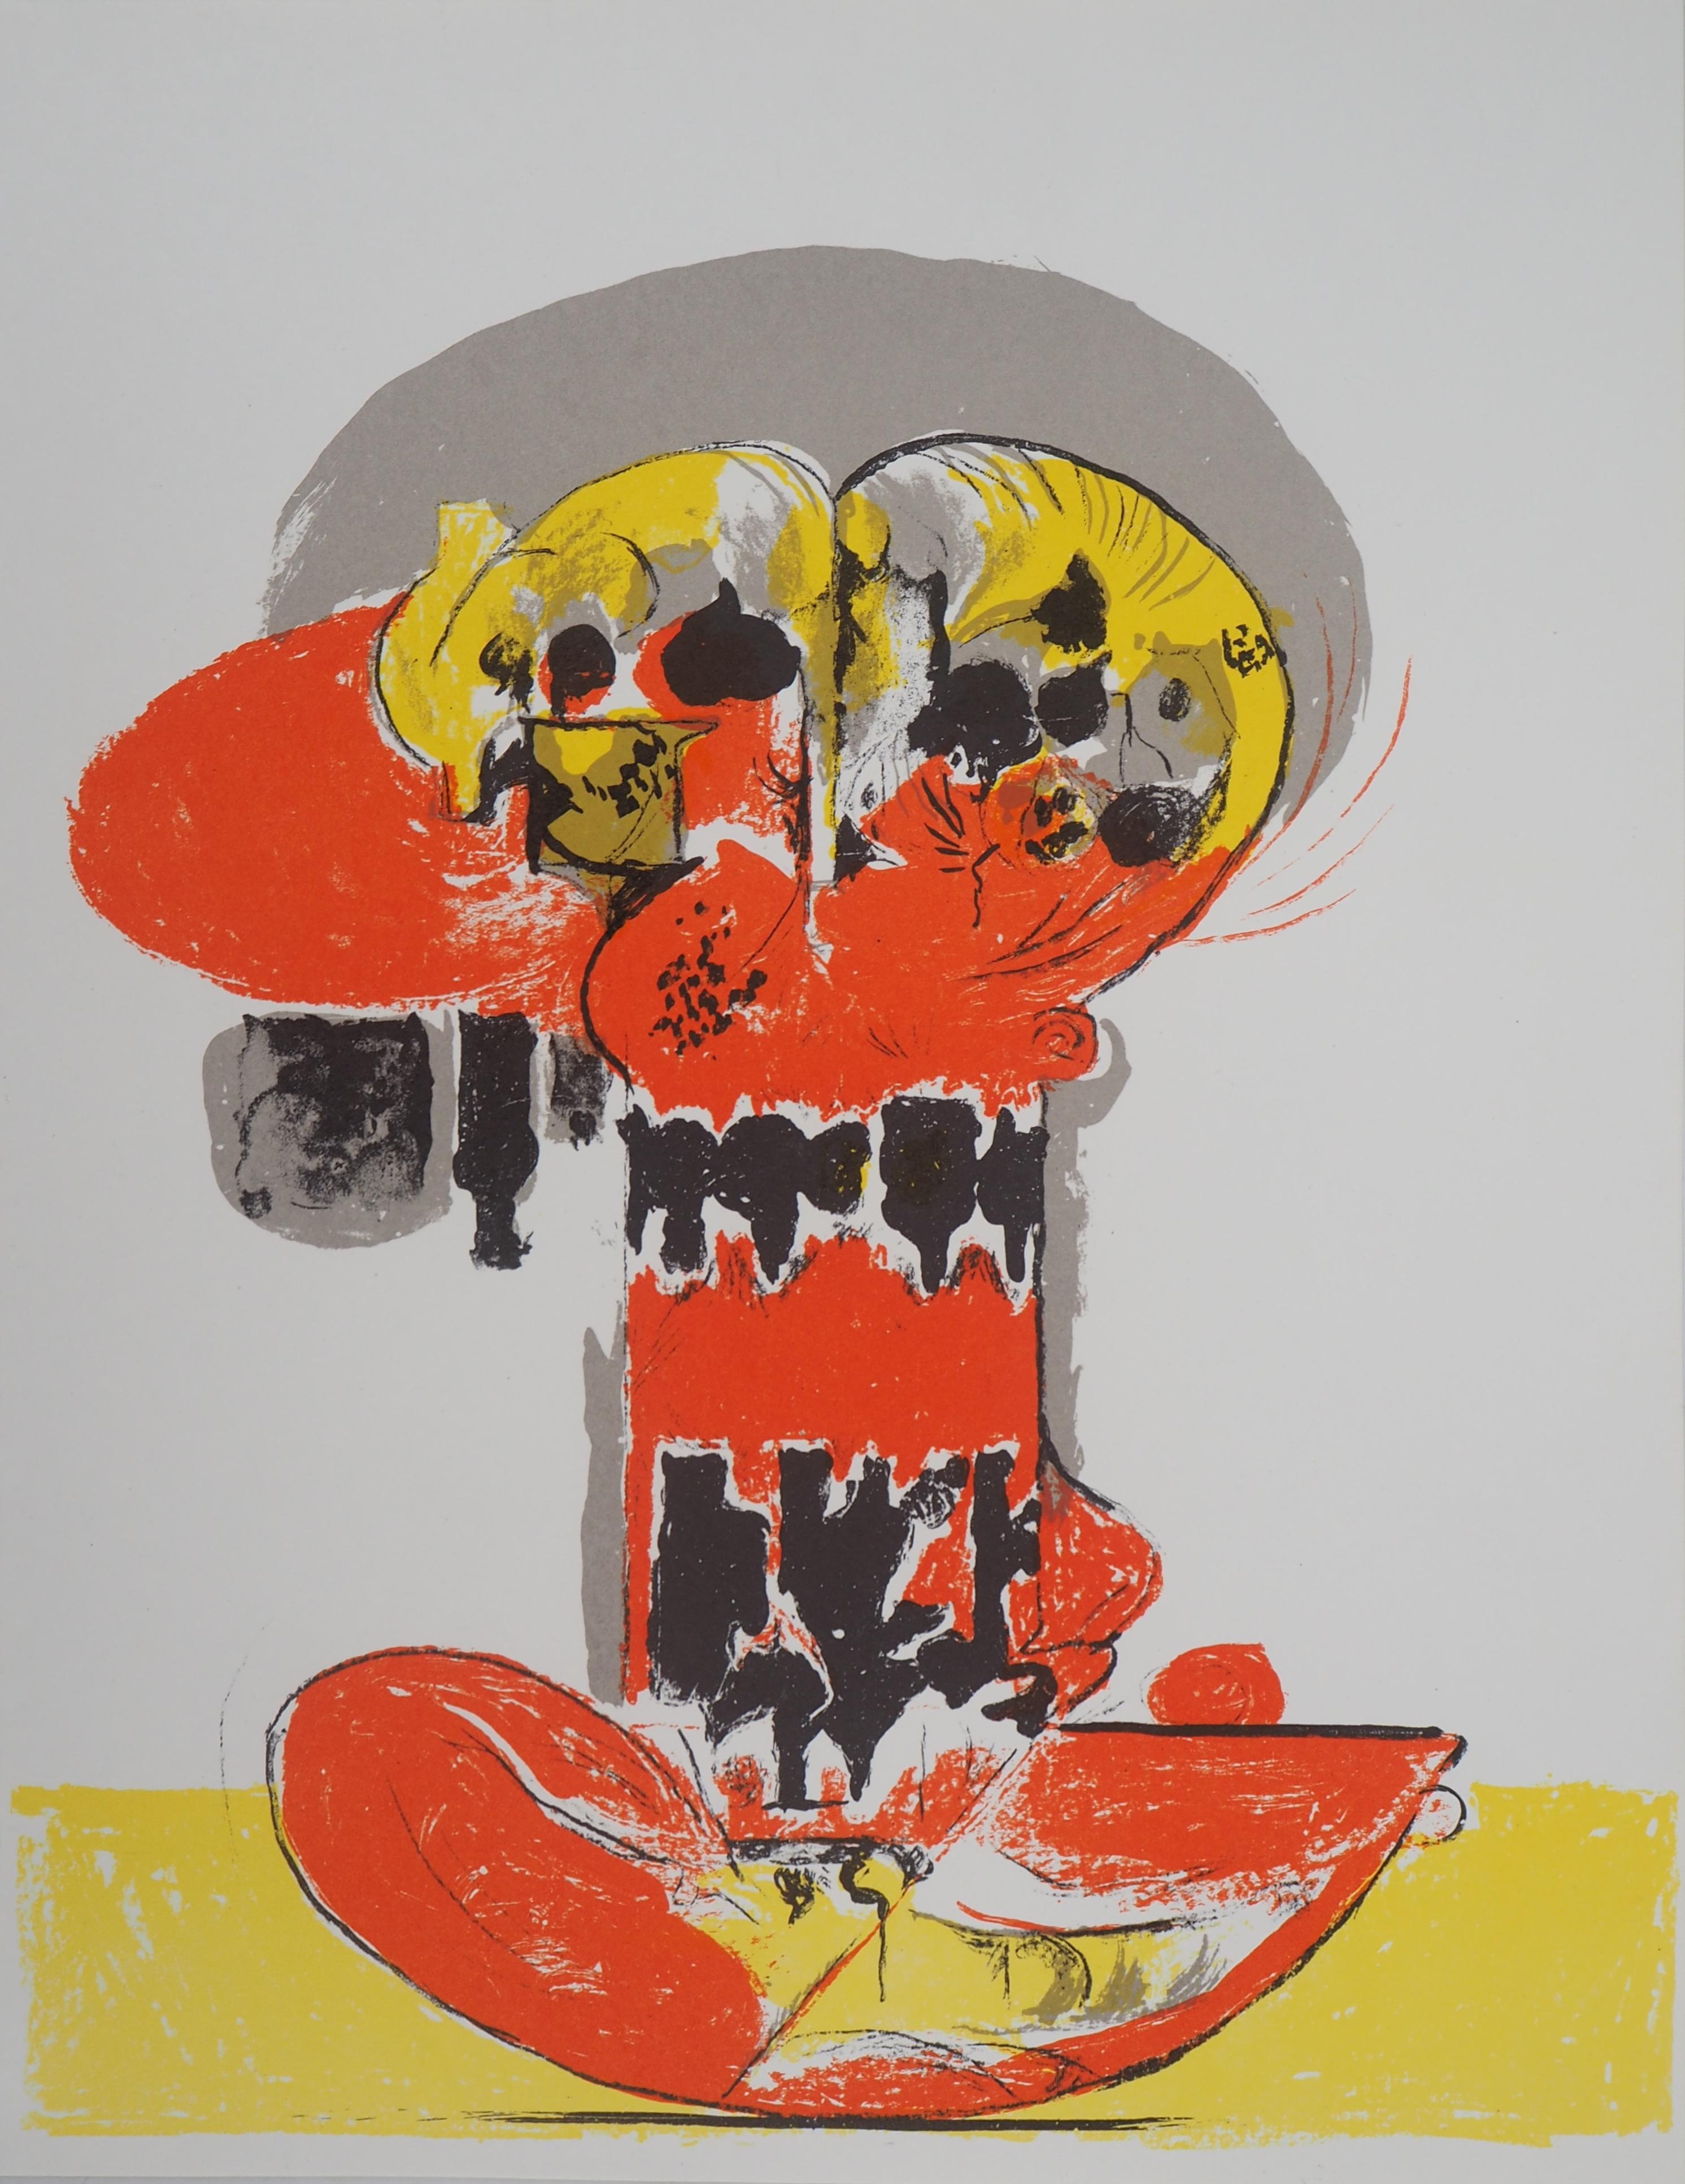 Composition with yellow and red - Original lithograph - Mourlot, 1972